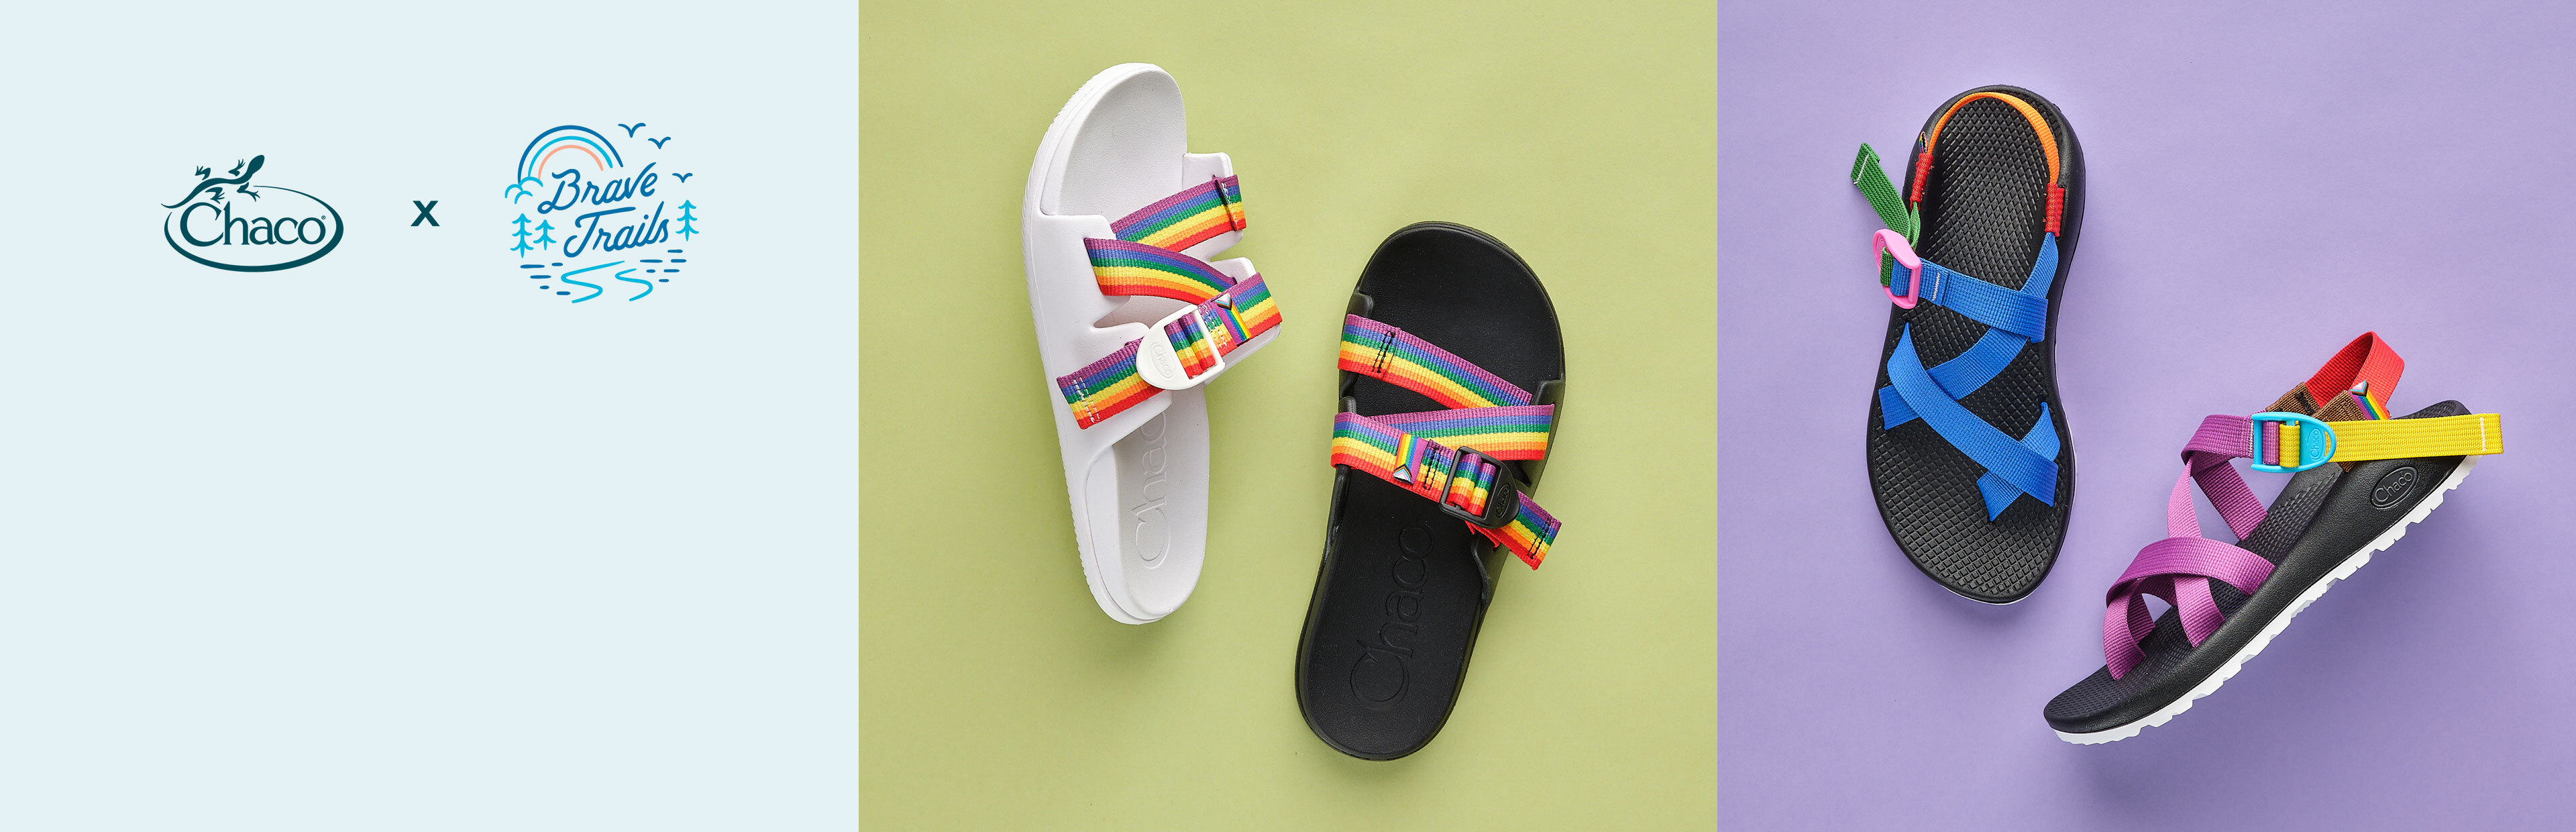 Chacos with rainbow colored straps